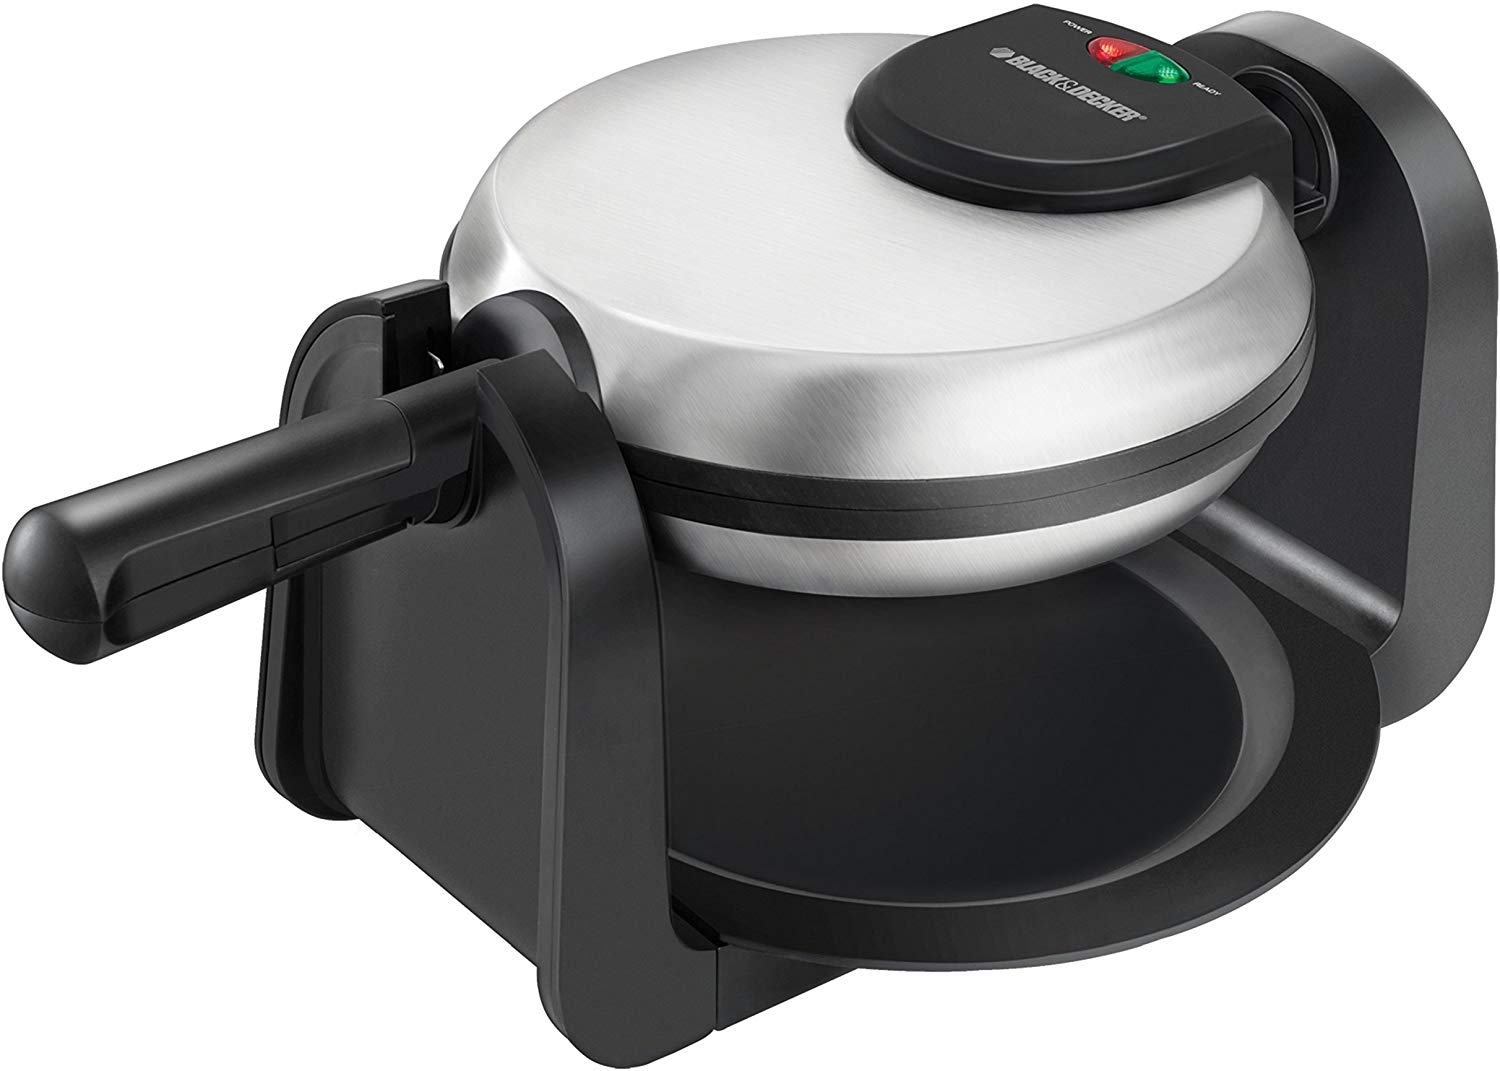 Flip vs Standard Waffle Maker: Which One Is Right for You?